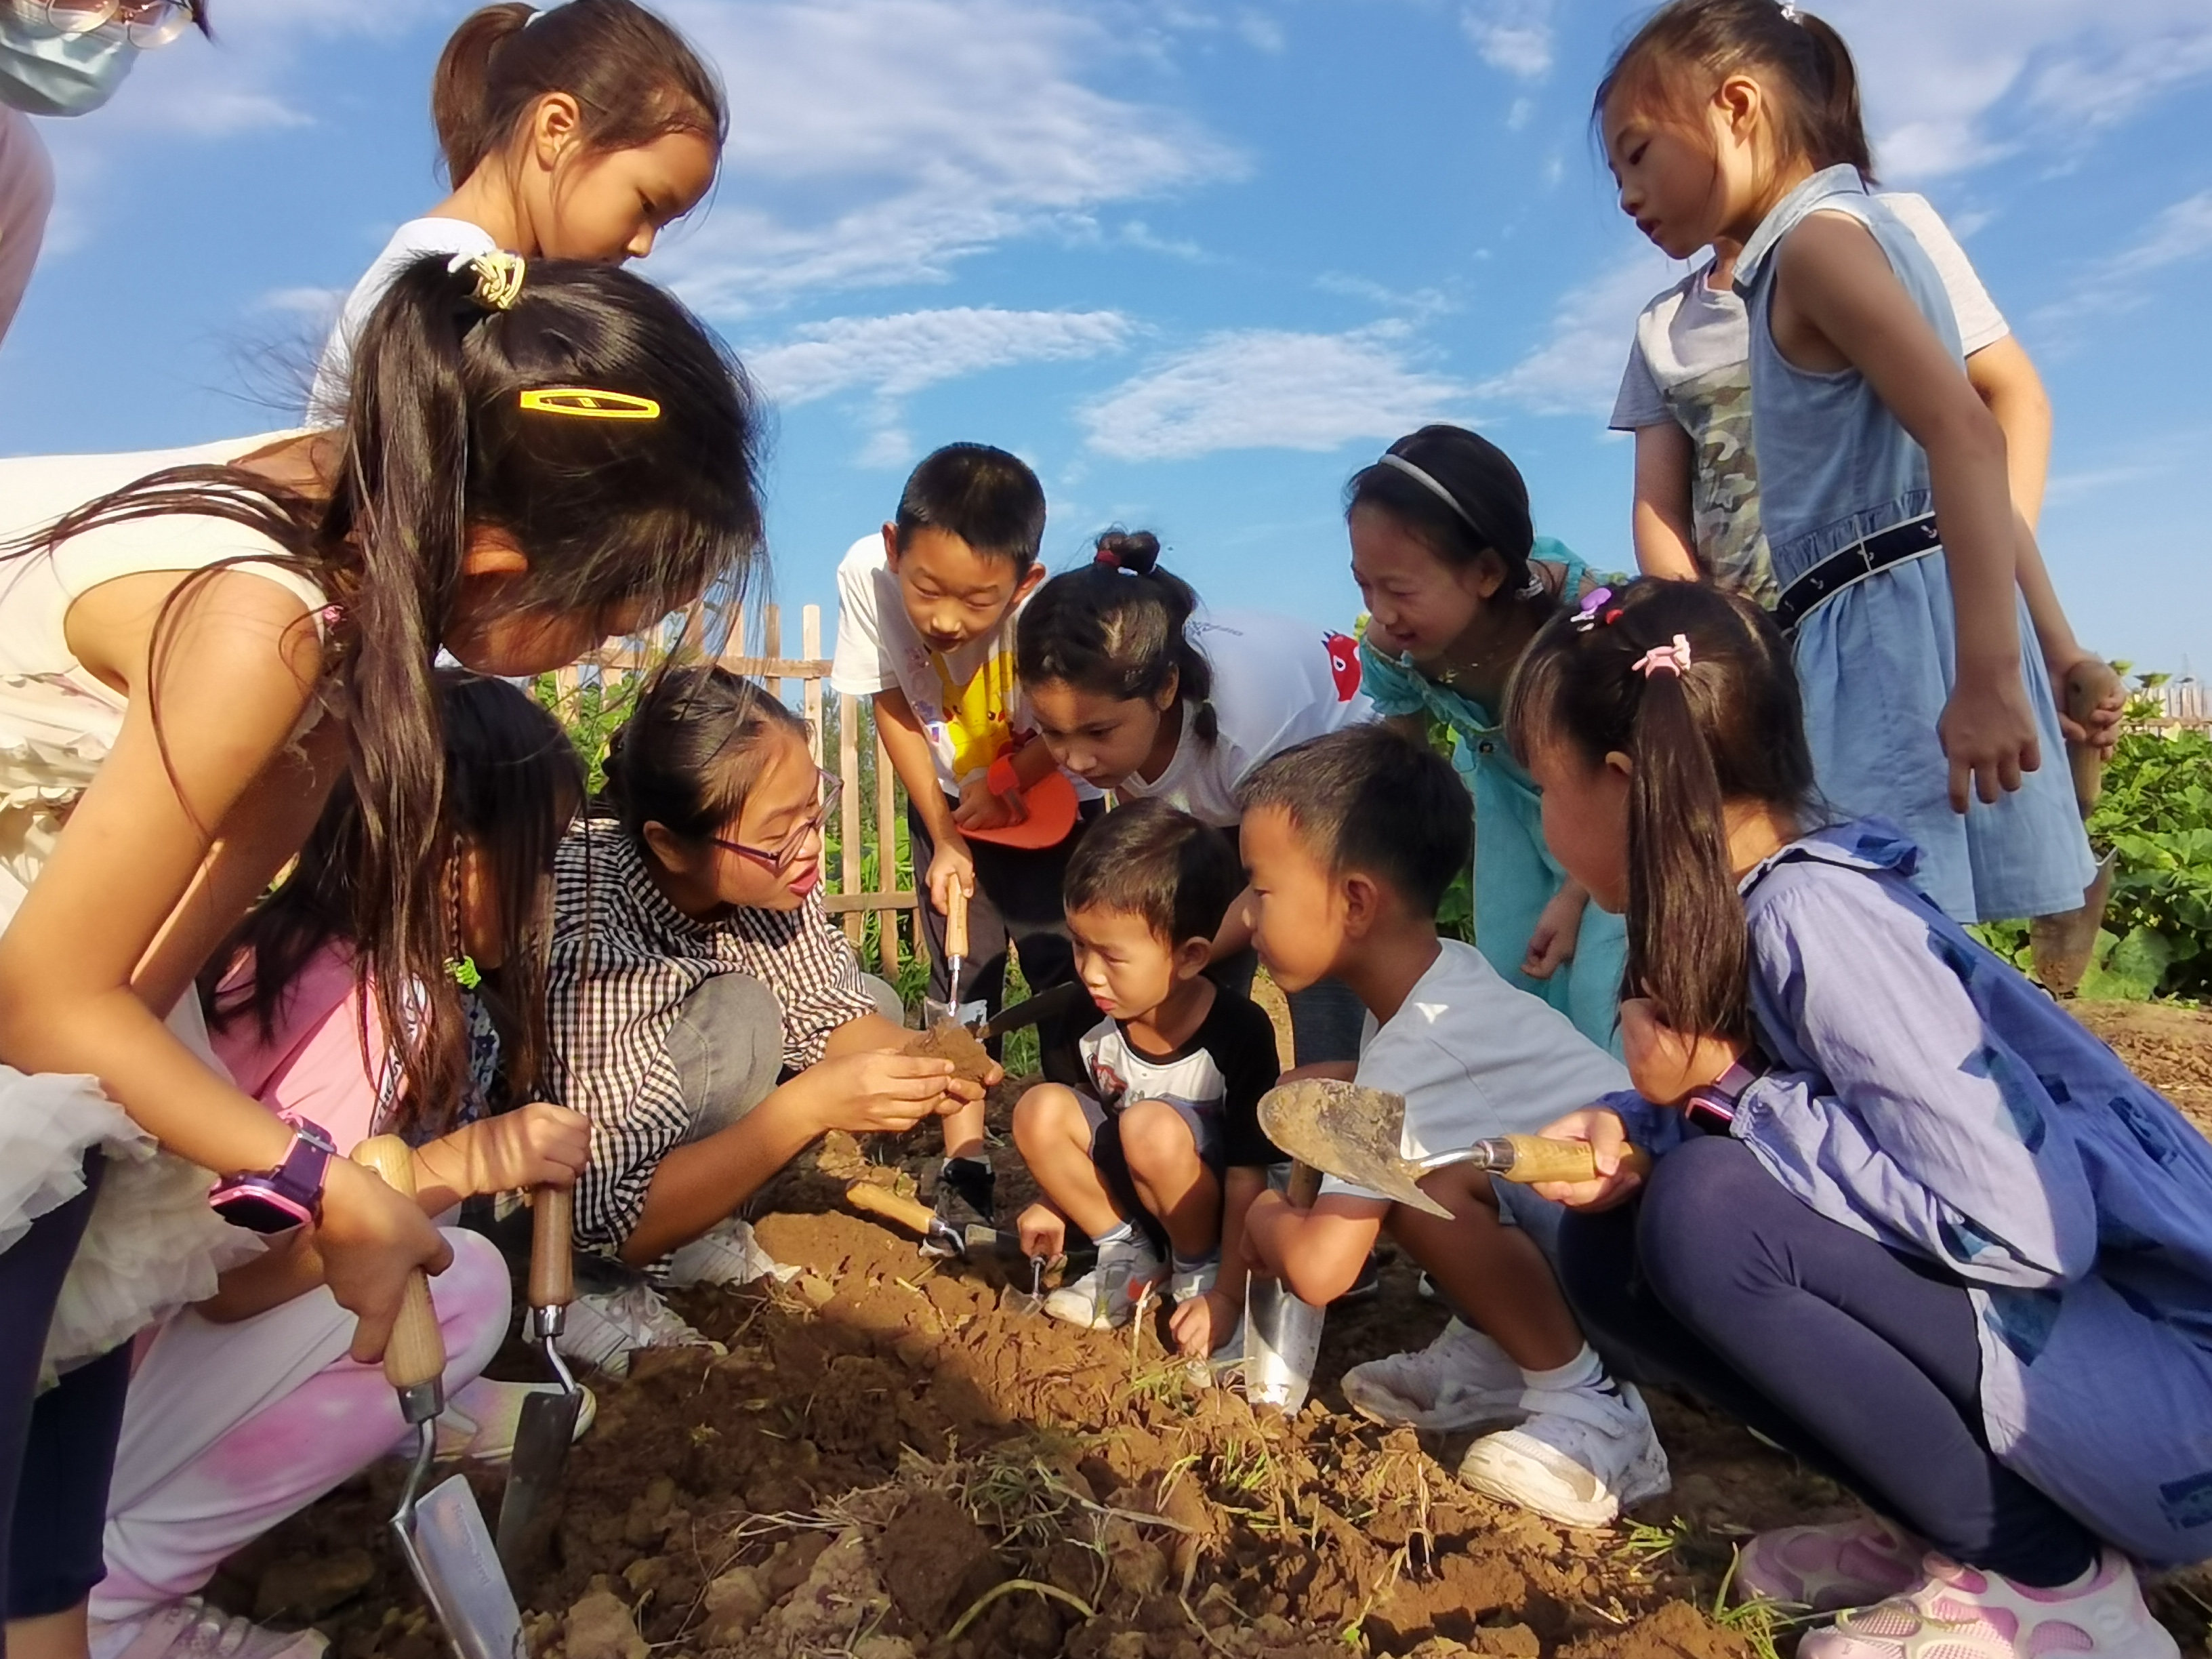 A young employee of the farm Wang Chunhua explains knowledge of soil for children who come from downtown Beijing during a field activity, Beijing, China, June, 2022. /Shared Harvest